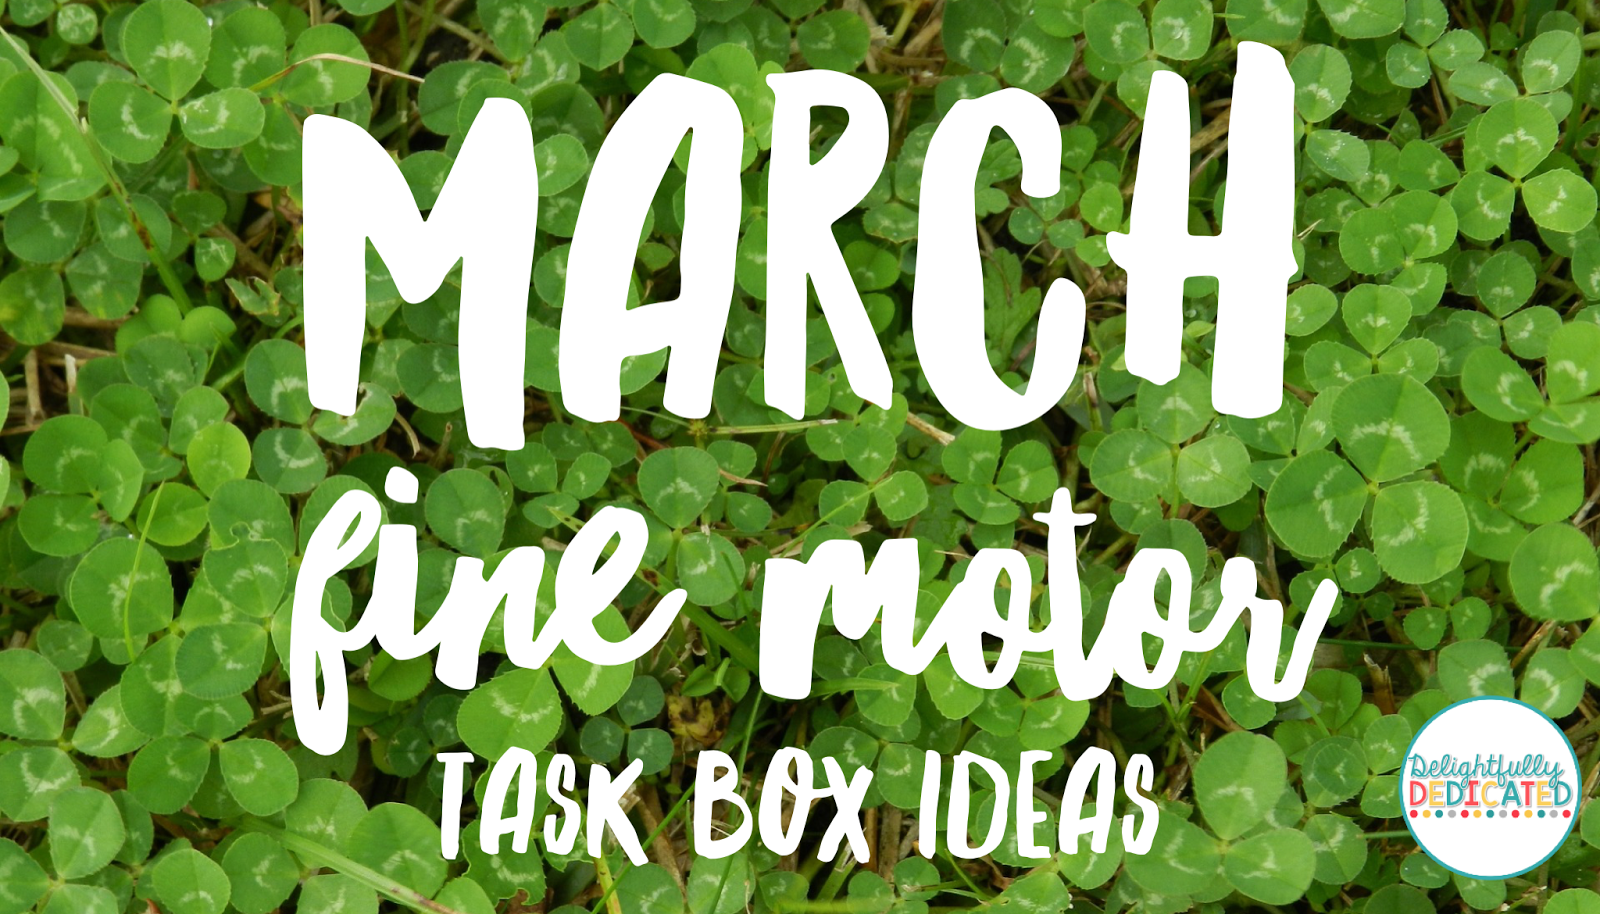 Special Education Task Boxes | Earth Day Basic Concepts